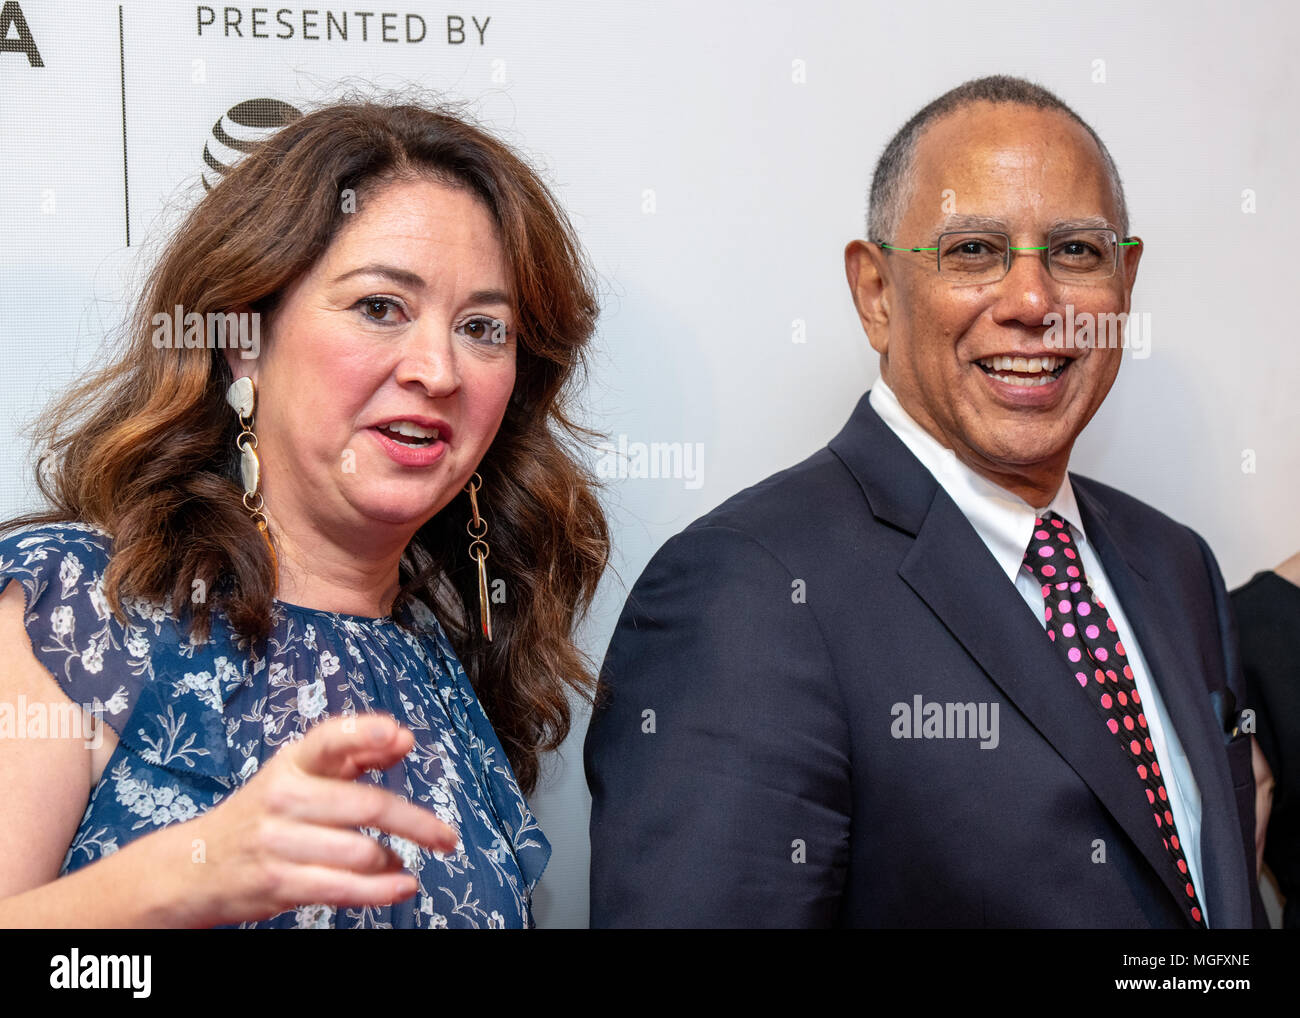 New York, USA, 28 April 2018. The New York Times Executive Editor Dean Baquet  attends the premiere of 'The Fourth Estate' next to director/producer of the film Liz Garbus at the 2018 Tribeca Film Festival in New York city.   Photo by Enrique Shore/Alamy Live News Stock Photo